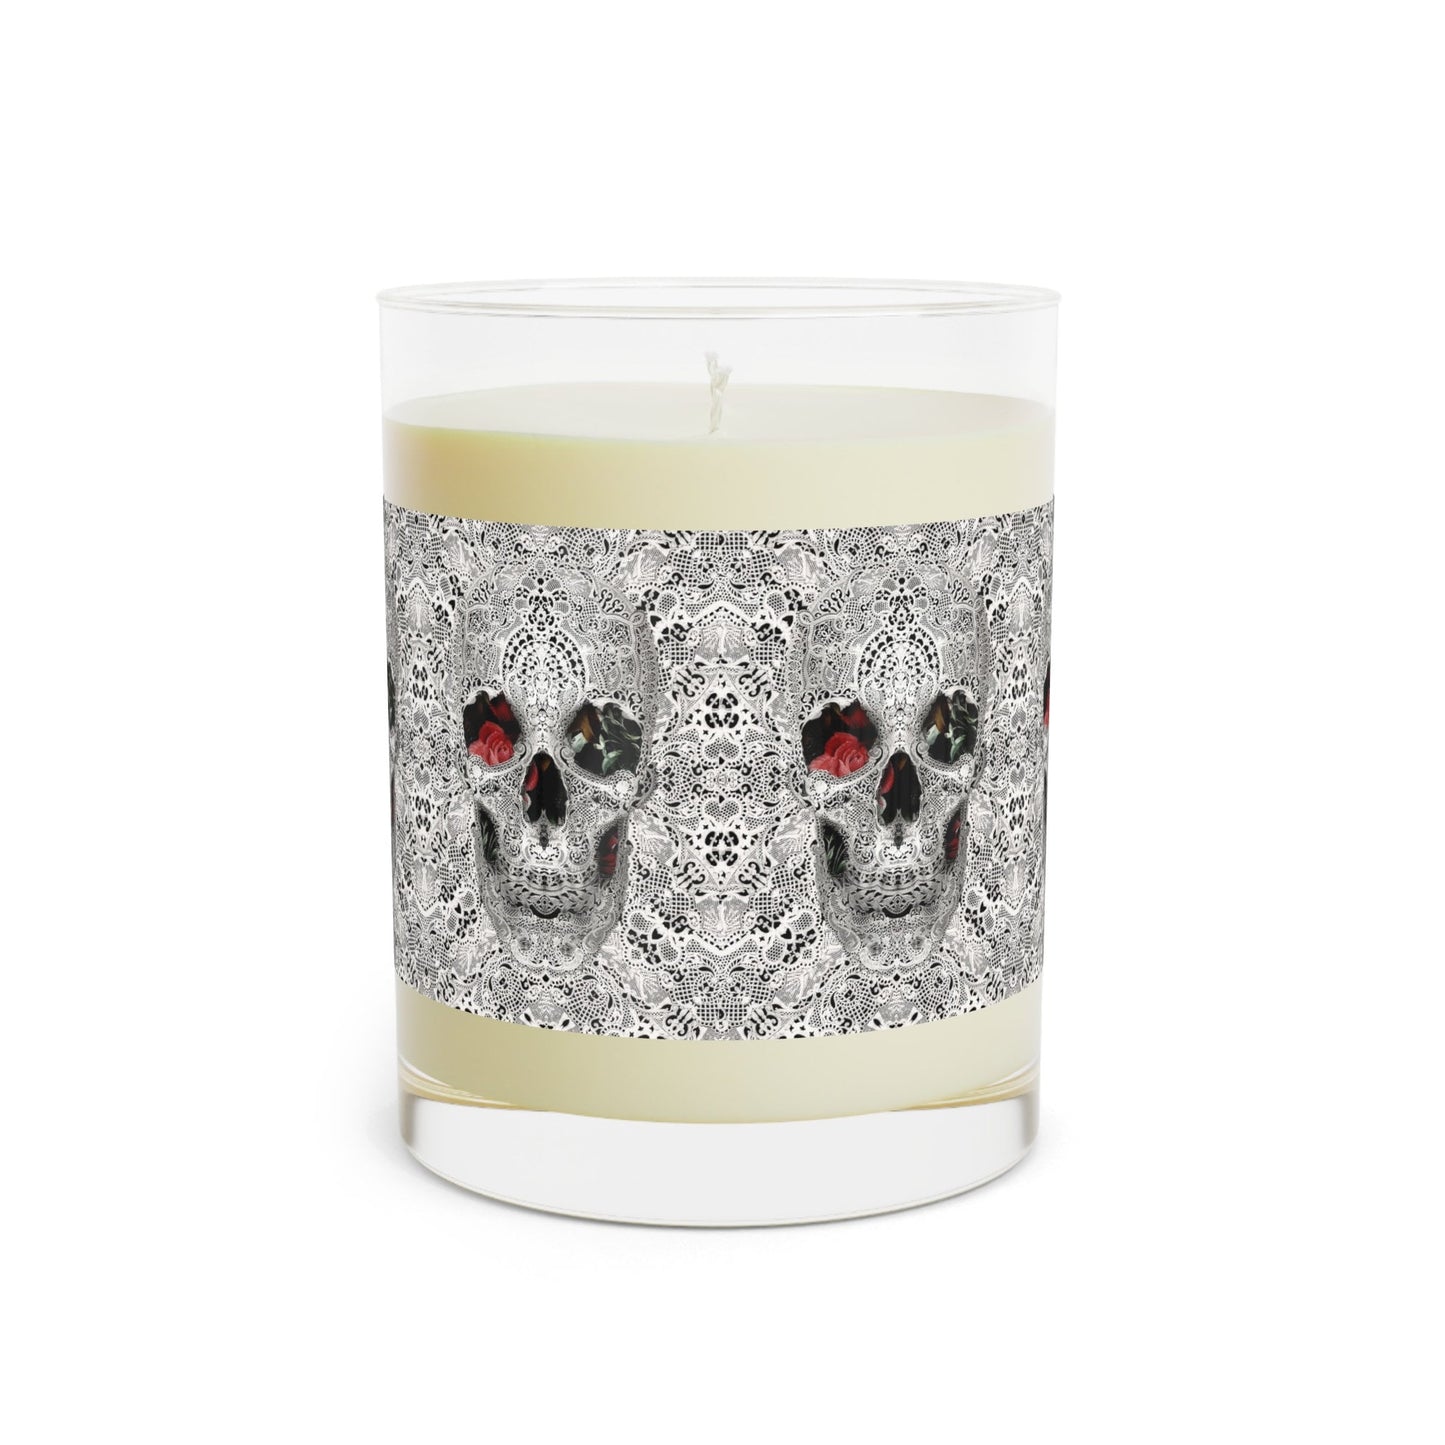 Skull Candle Decor - Full Glass, 11oz Scented Skull Candle